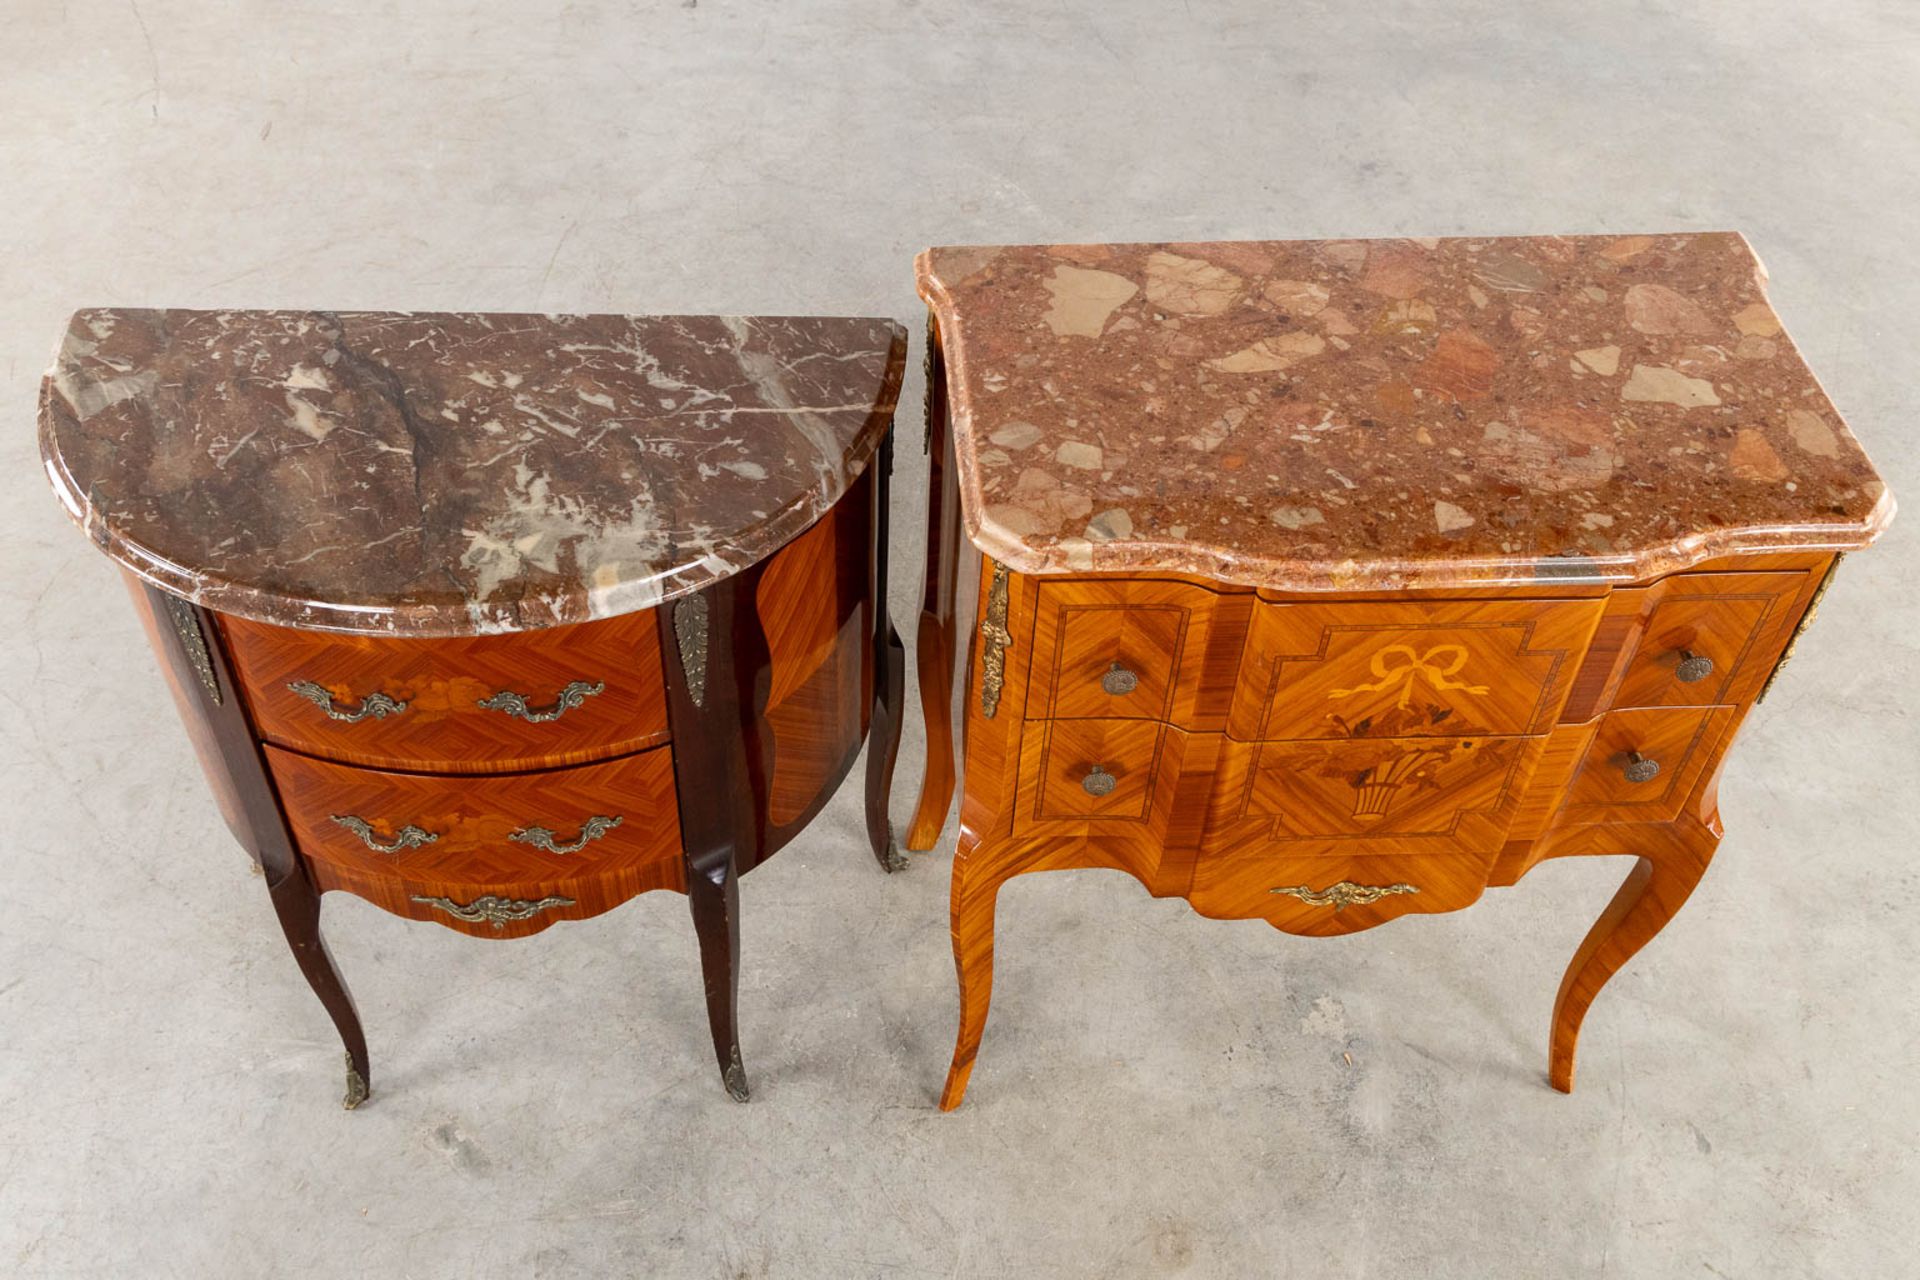 Two small cabinets with drawers, marquetry inlay and a marble top. 20th C. (L:39 x W:70 x H:80 cm) - Bild 10 aus 11